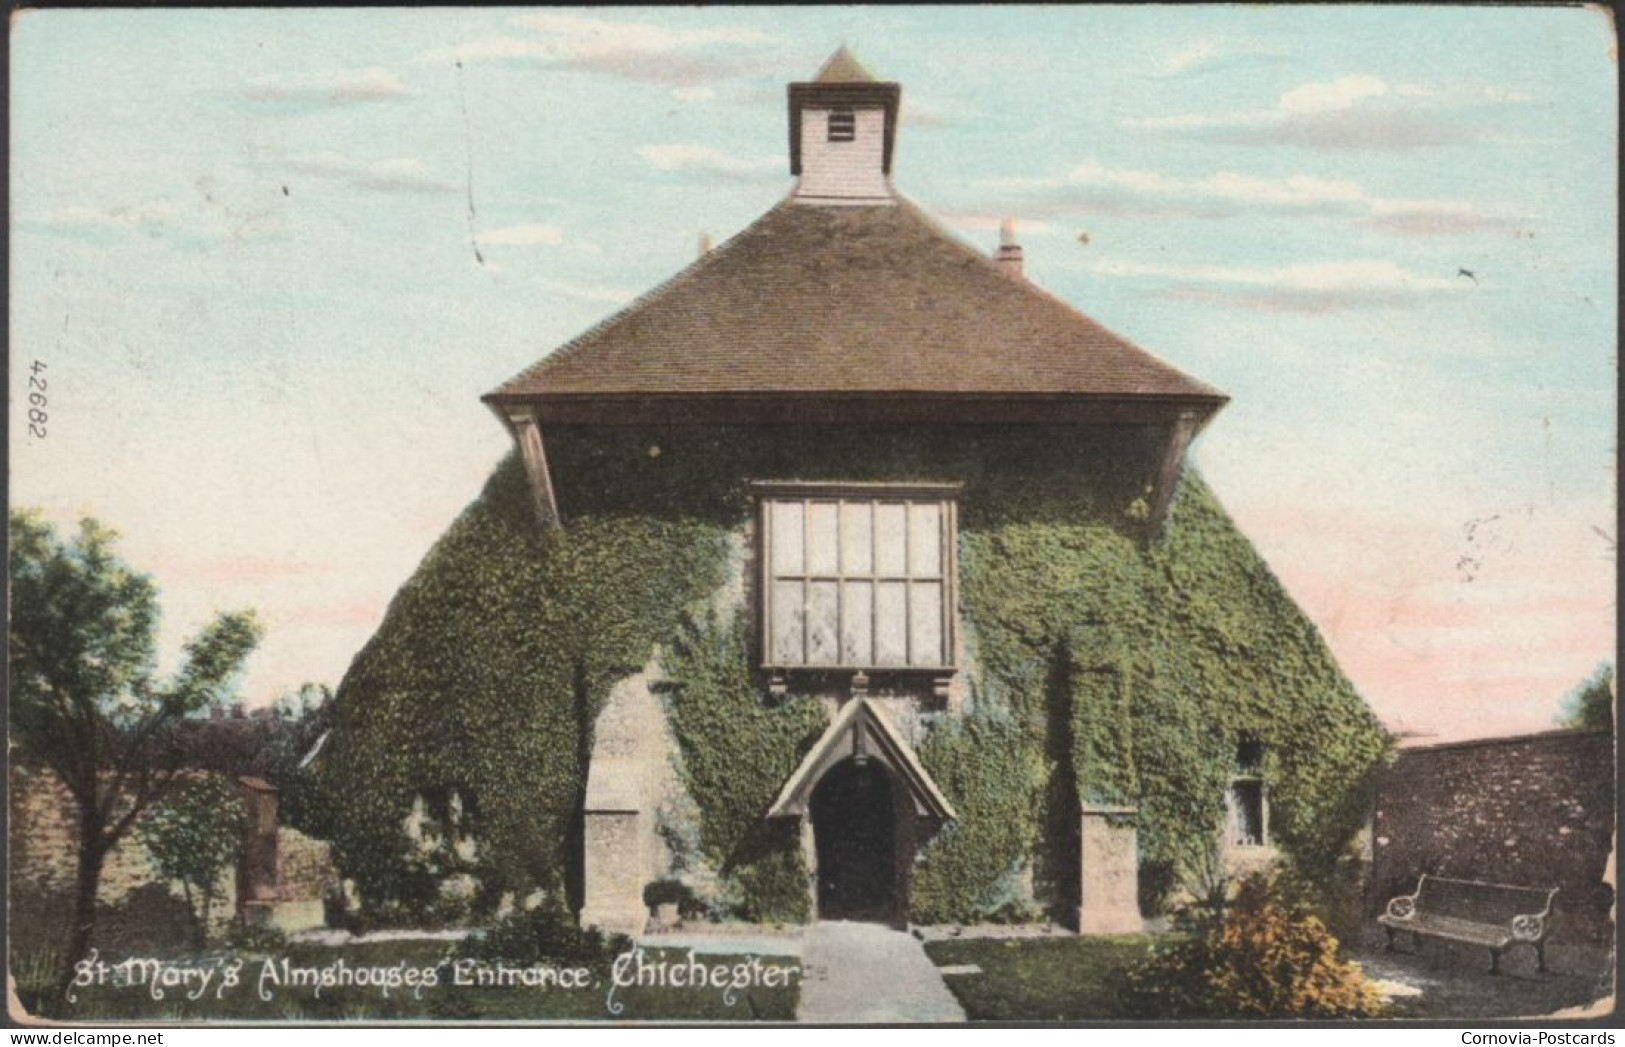 St Mary's Almshouses Entrance, Chichester, Sussex, 1910 - Frith's Postcard - Chichester